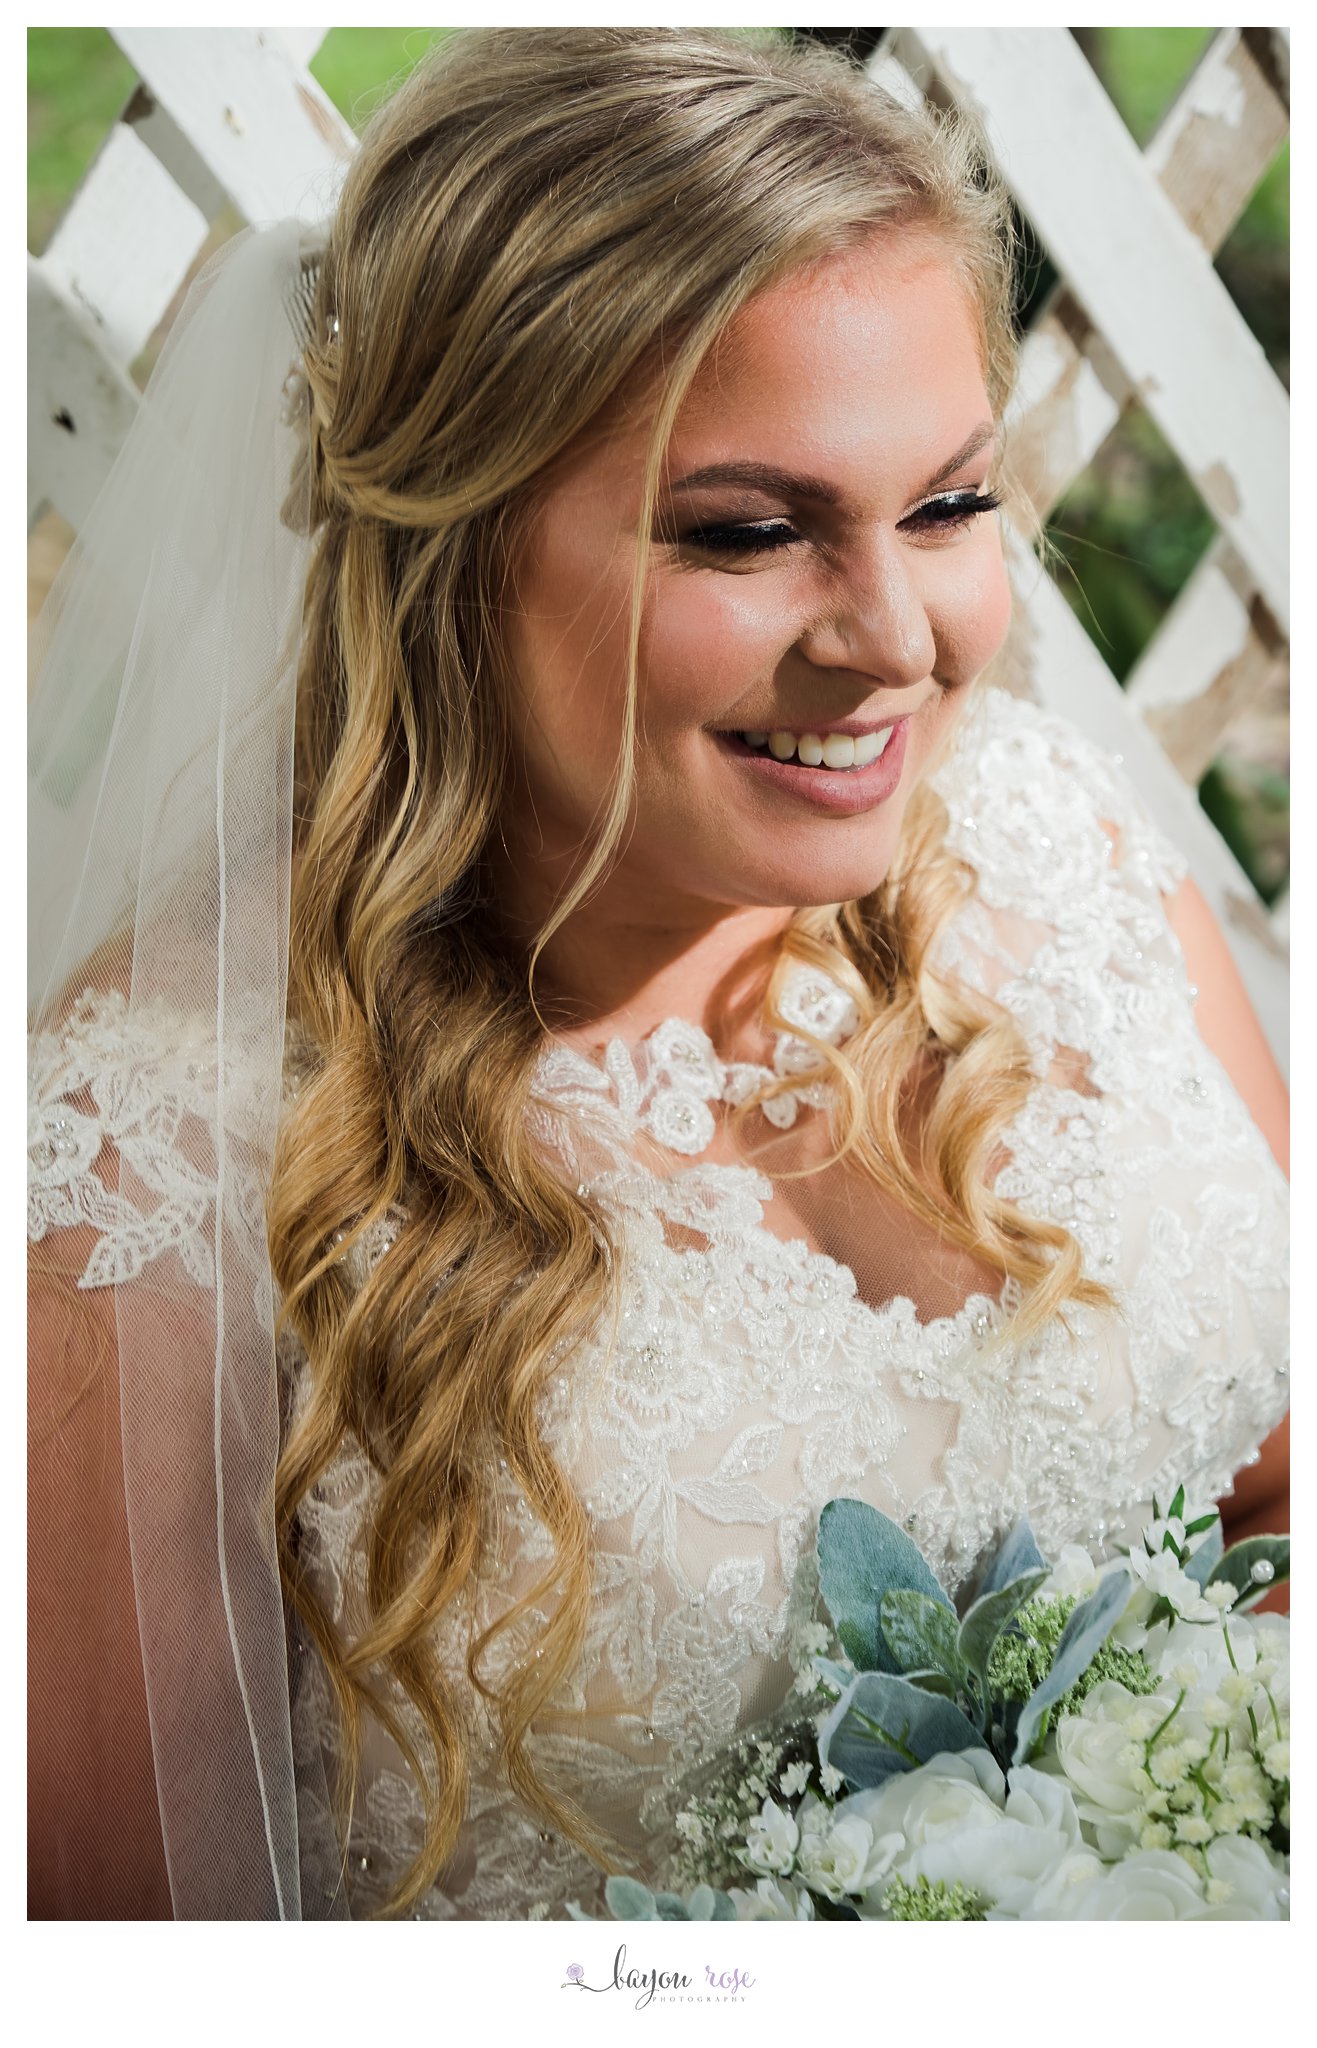 Close up photo of bride laughing in bridal photo